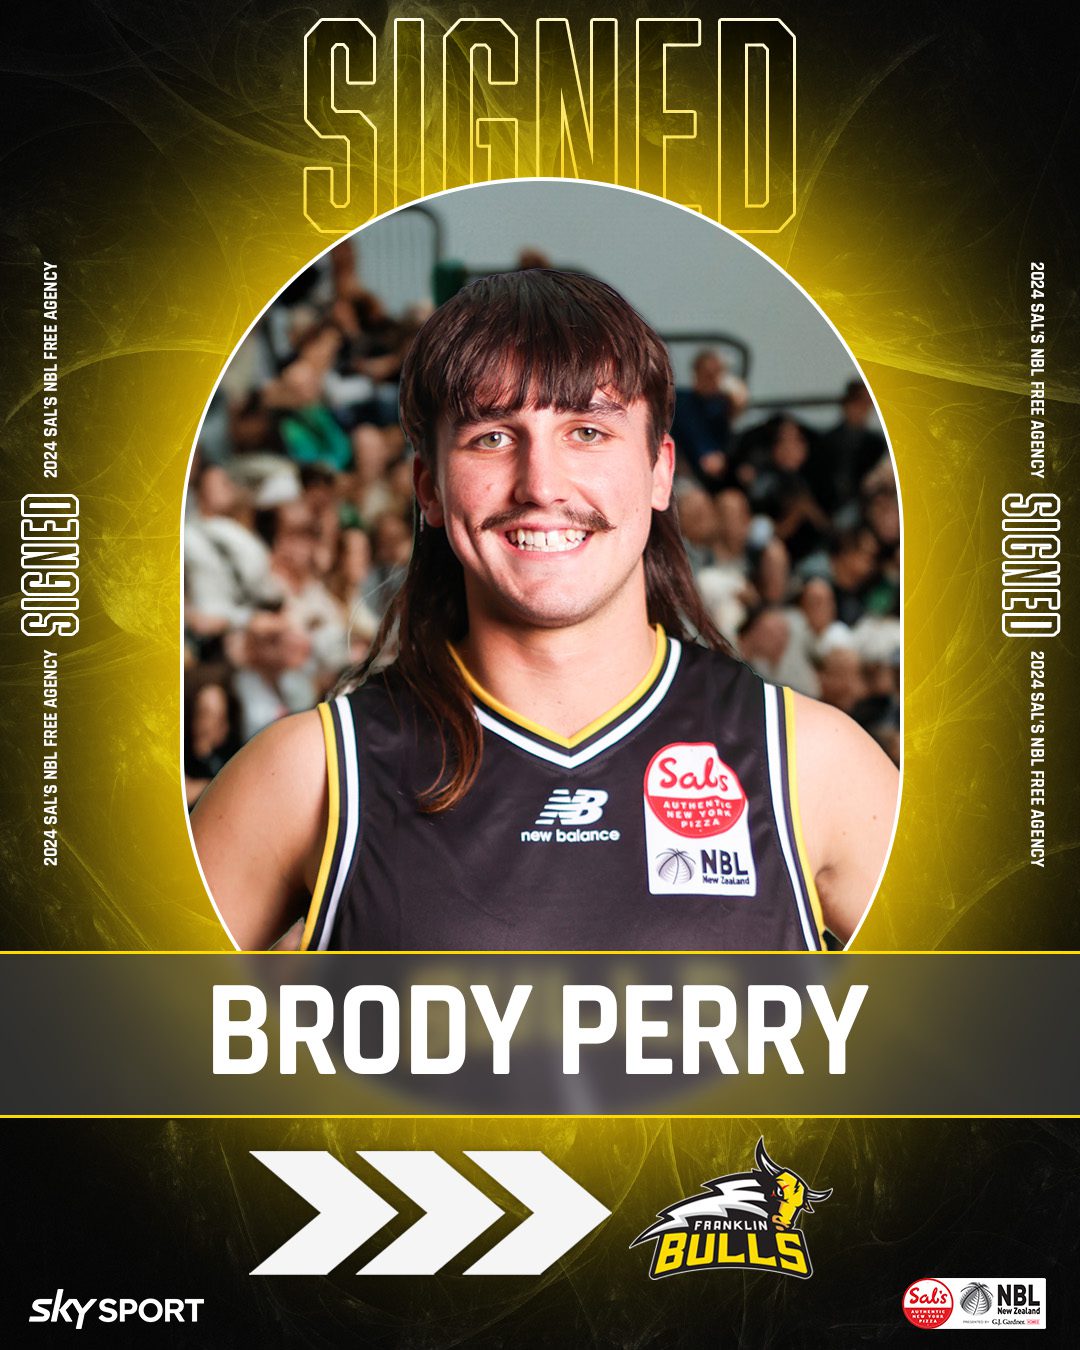 Brody Perry